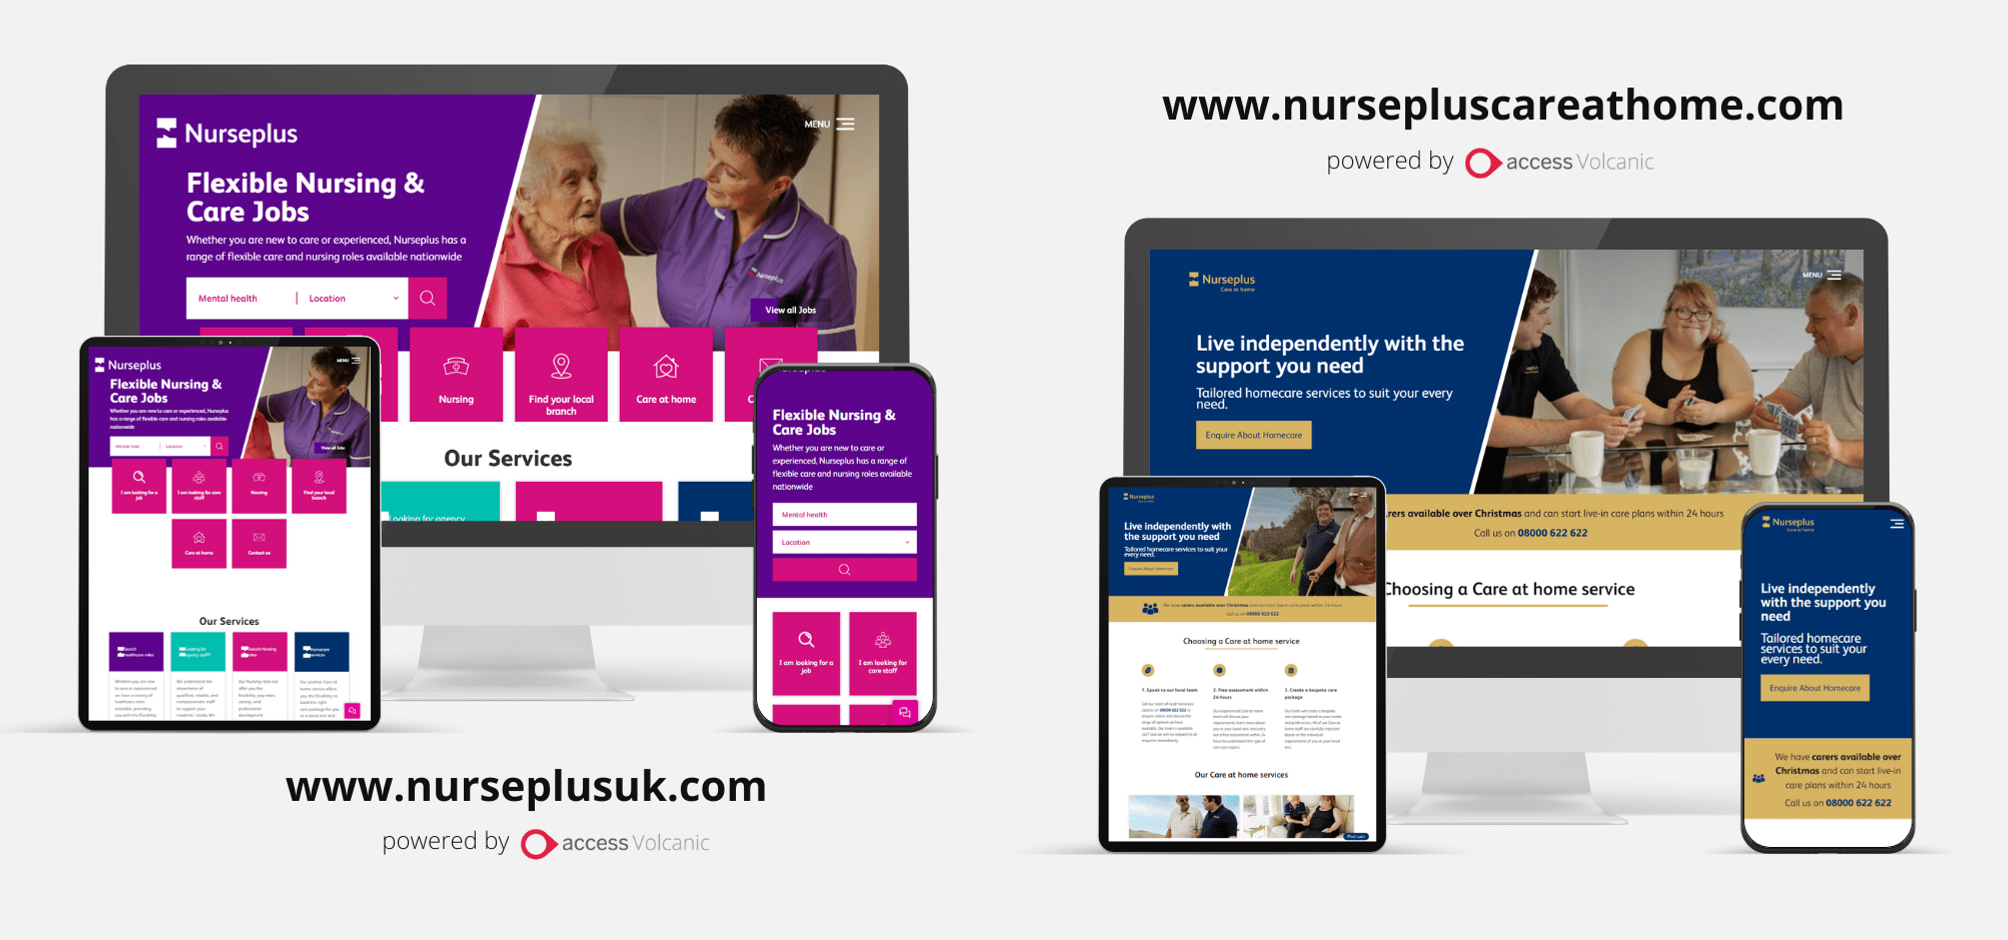 Nurseplus websites on multiple devices by Access Volcanic